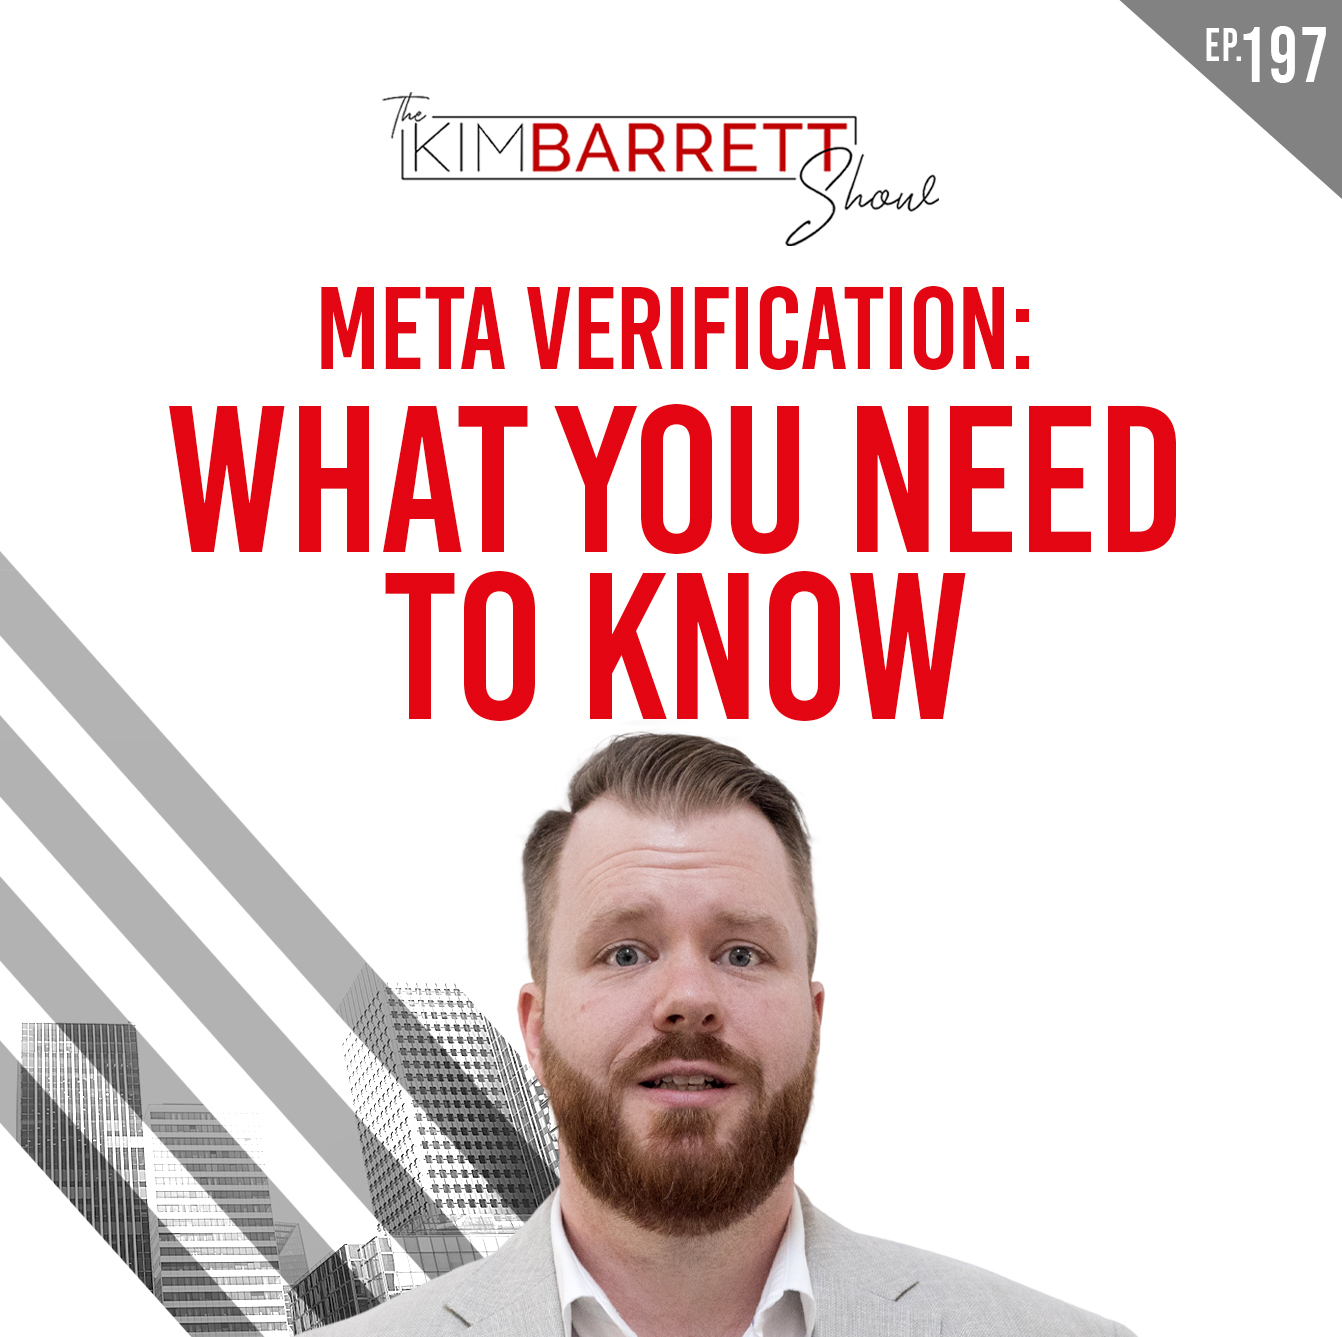 Meta Verification: What You Need to Know